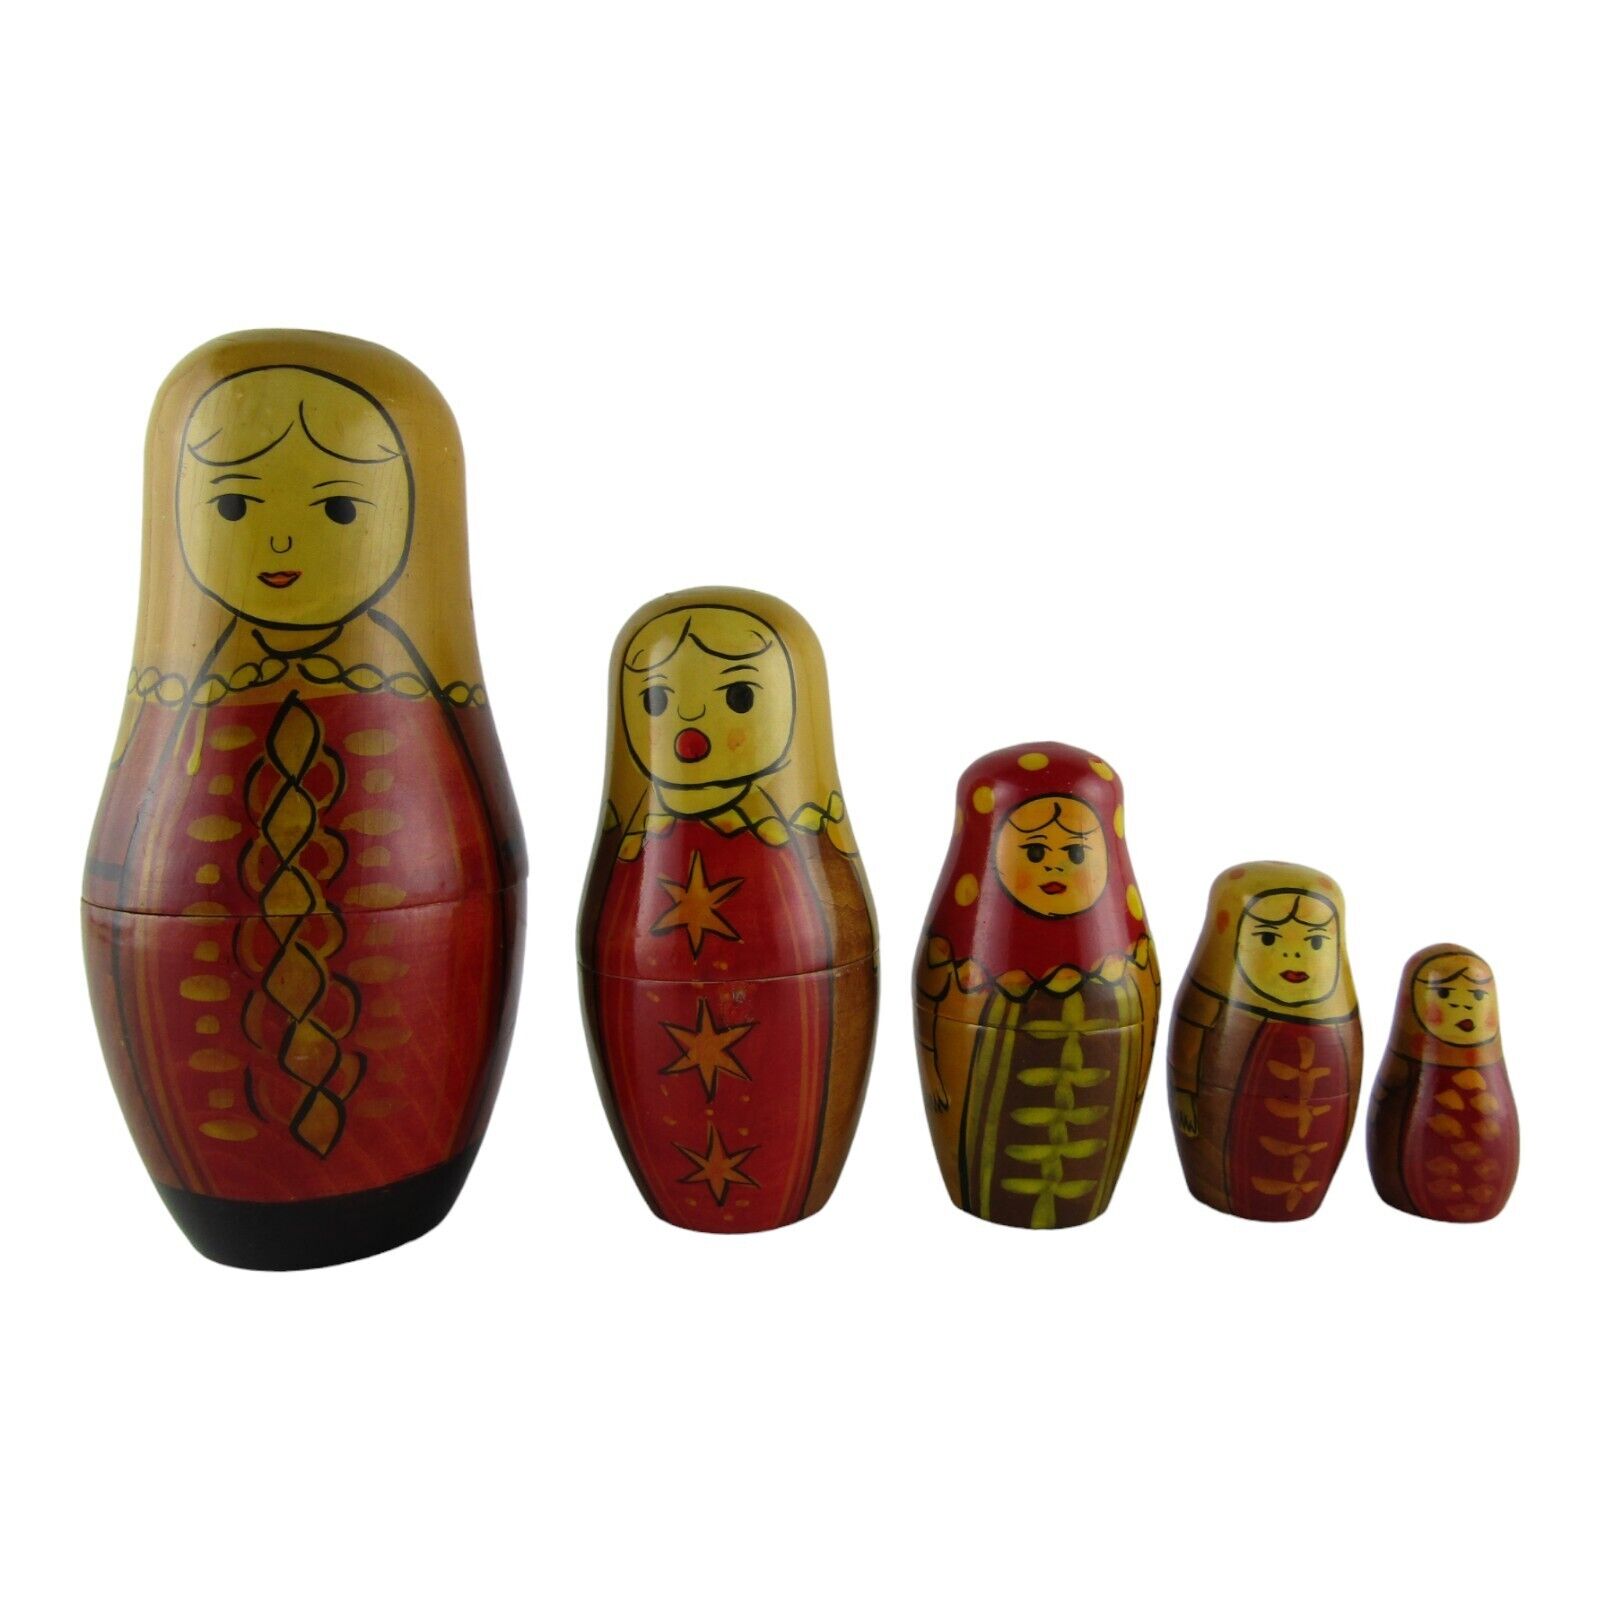 Vintage USSR Russian Nesting Matryoshka Wooden Hand Painted Stacking Dolls 5 Pc